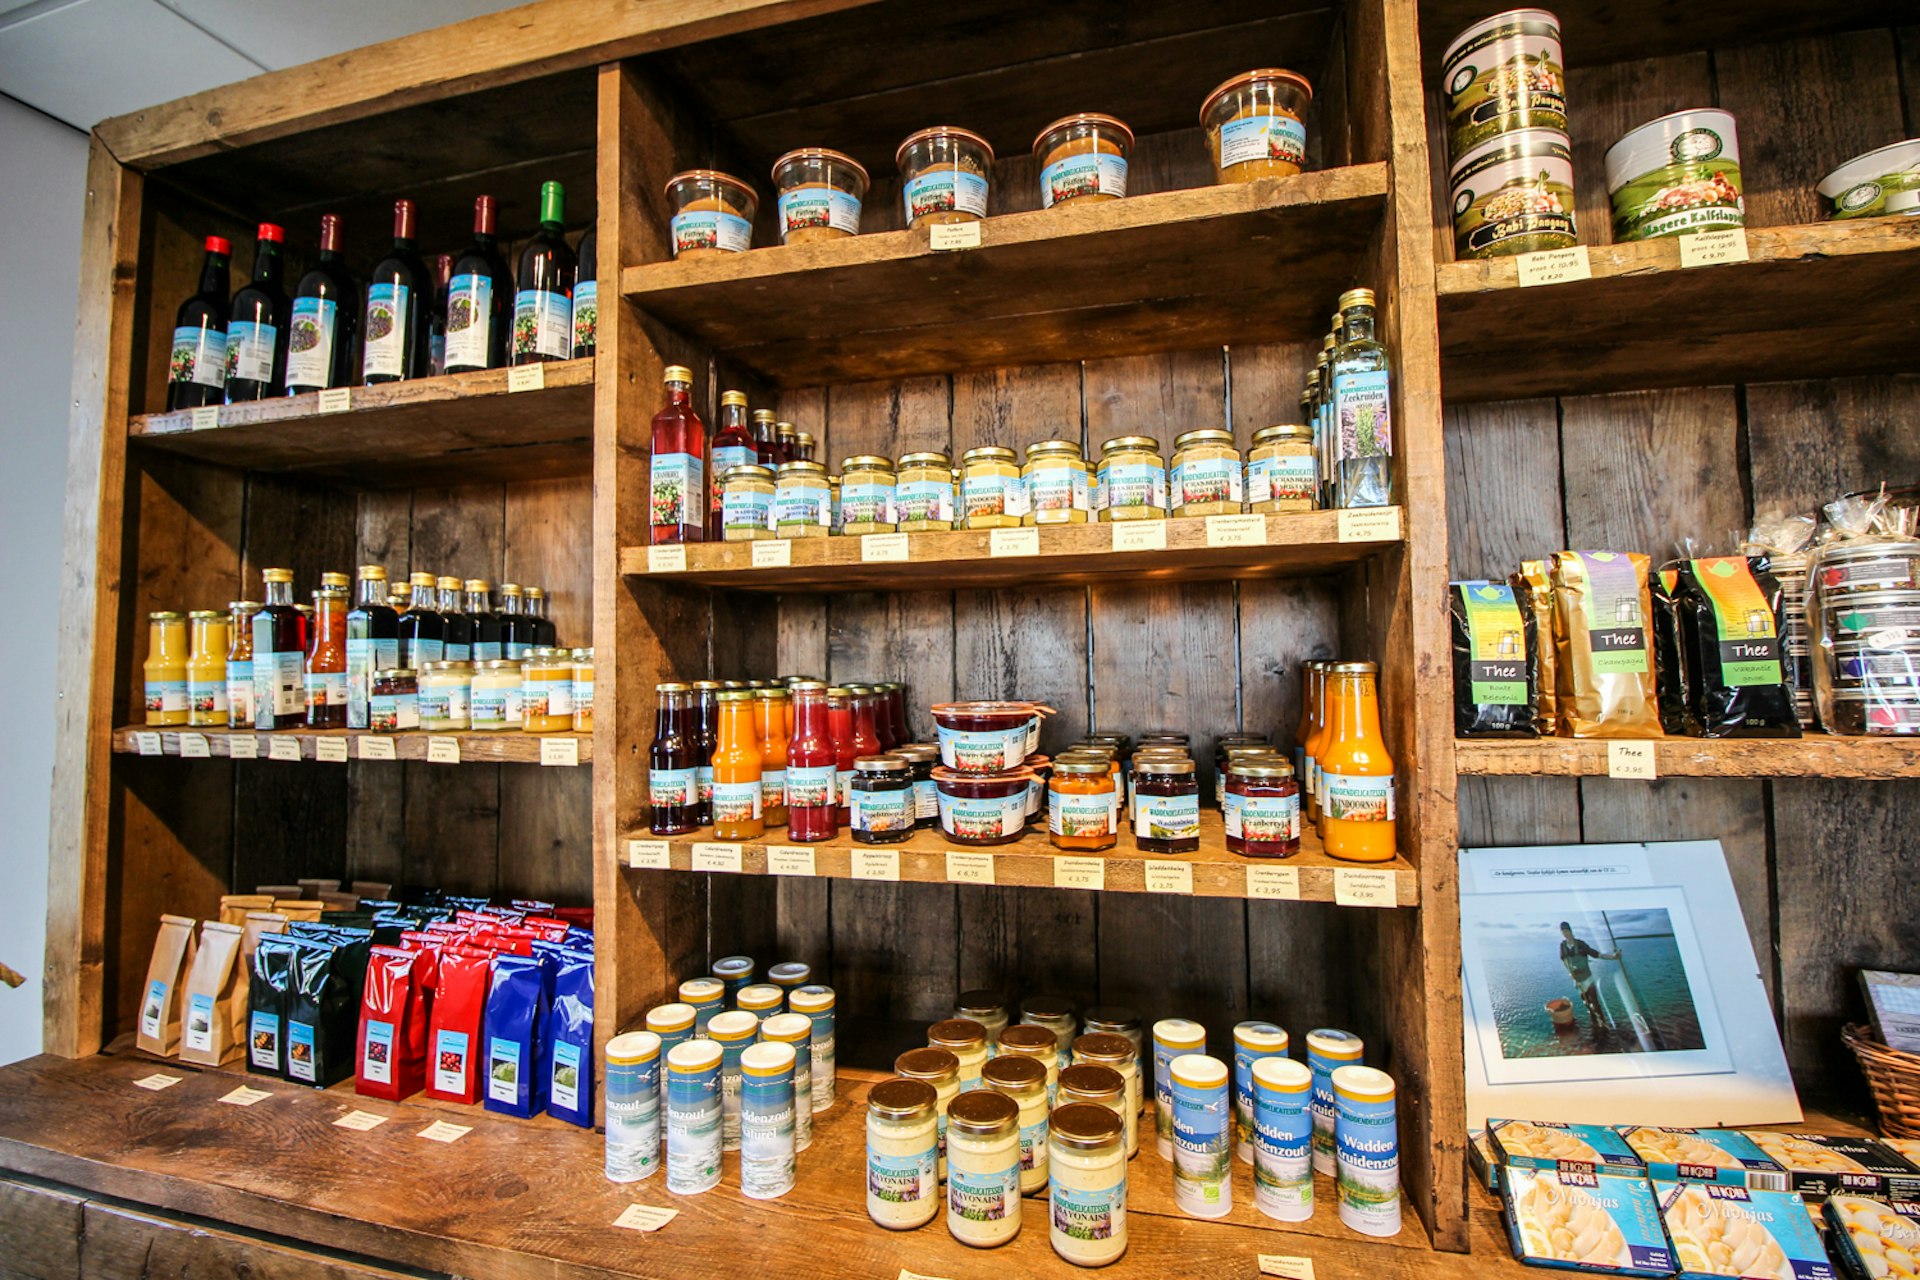 De Kade stocks a variety of Texel-made products © Catherine Le Nevez / Lonely Planet